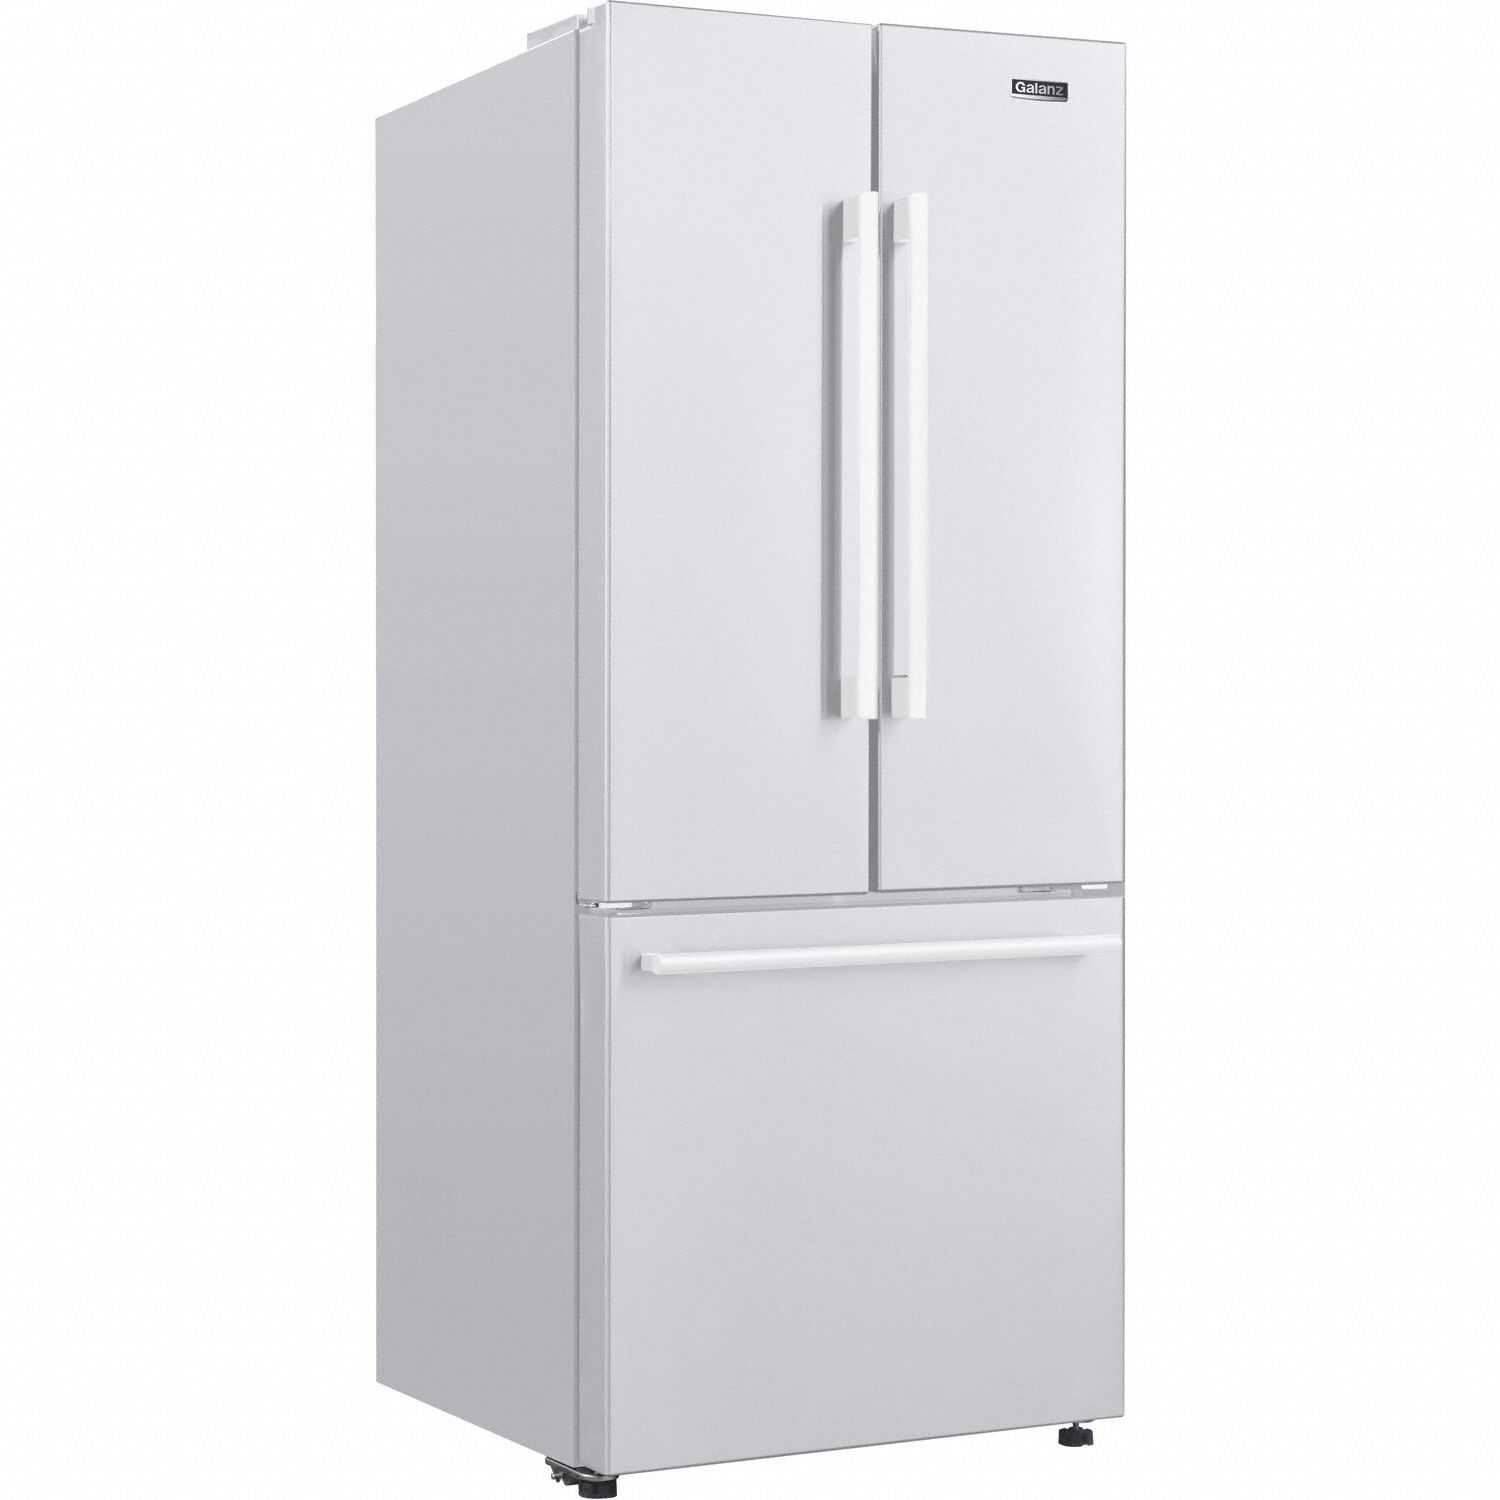 French Door Refrigerator: White, 16 cu ft Total Capacity, 2 Shelves, 9 to 16.9 cu ft